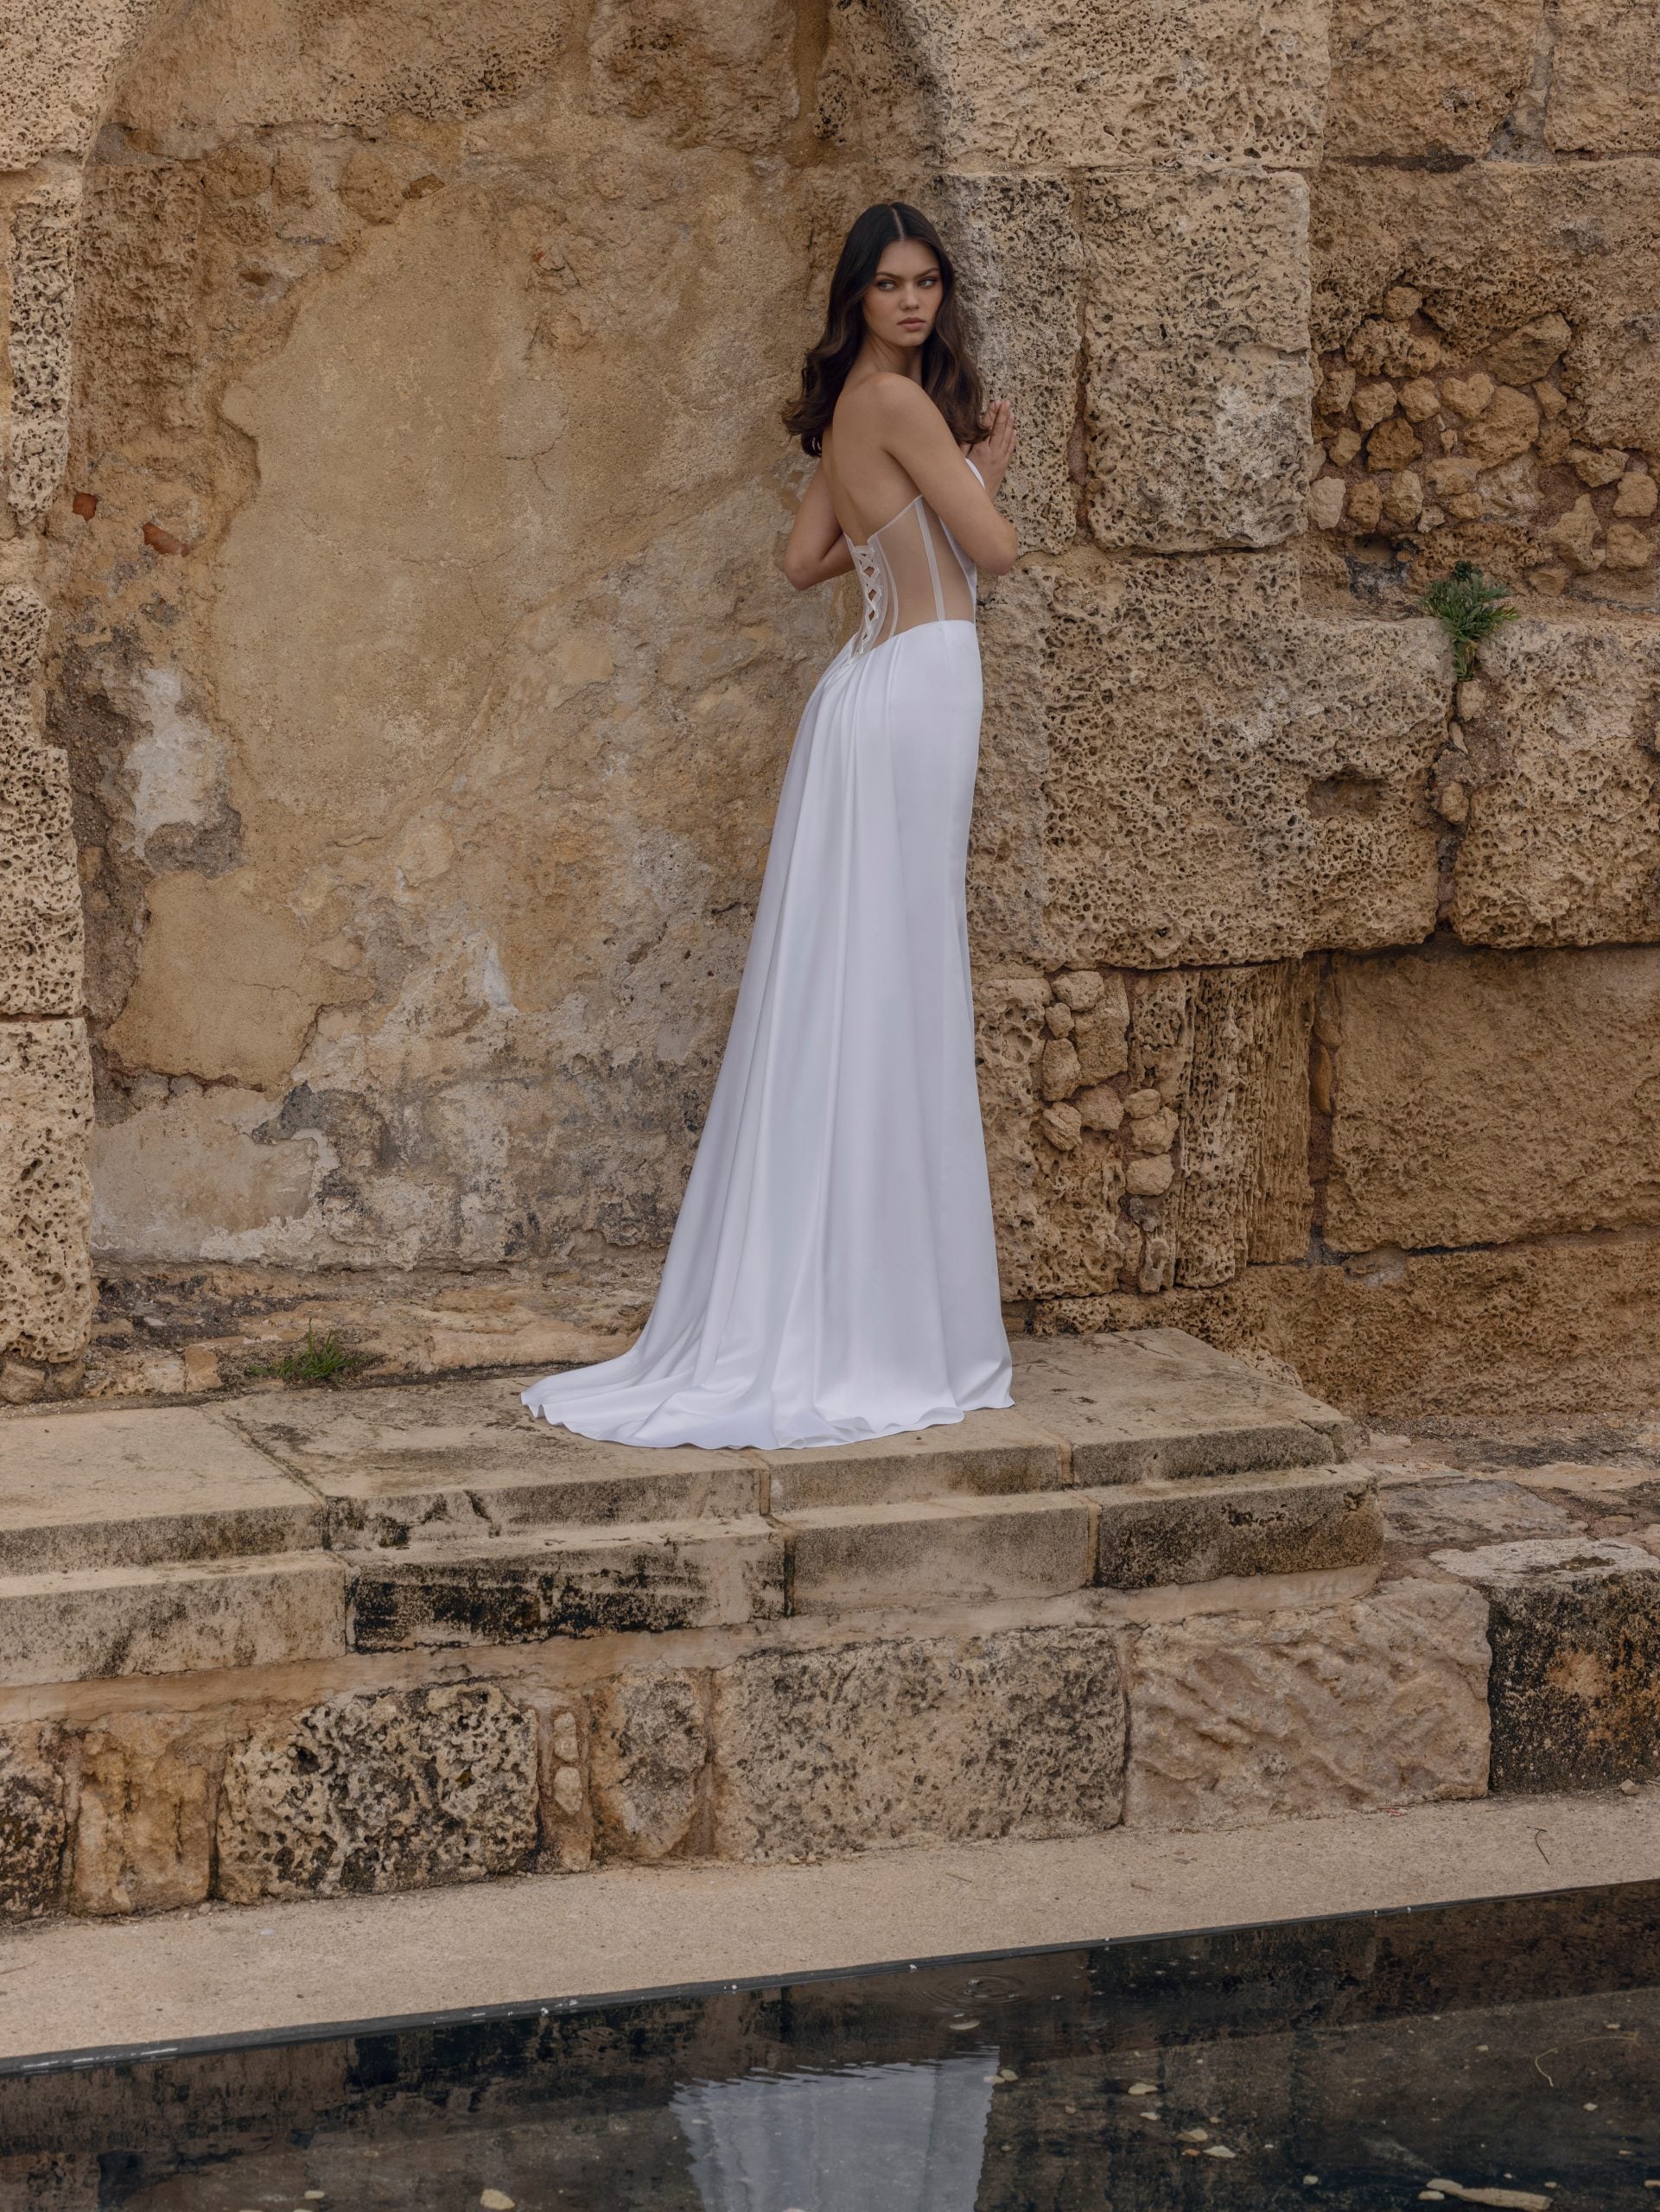 Strapless Fit And Flare Wedding Dress With Illusion Sides by Love by Pnina Tornai - Image 2